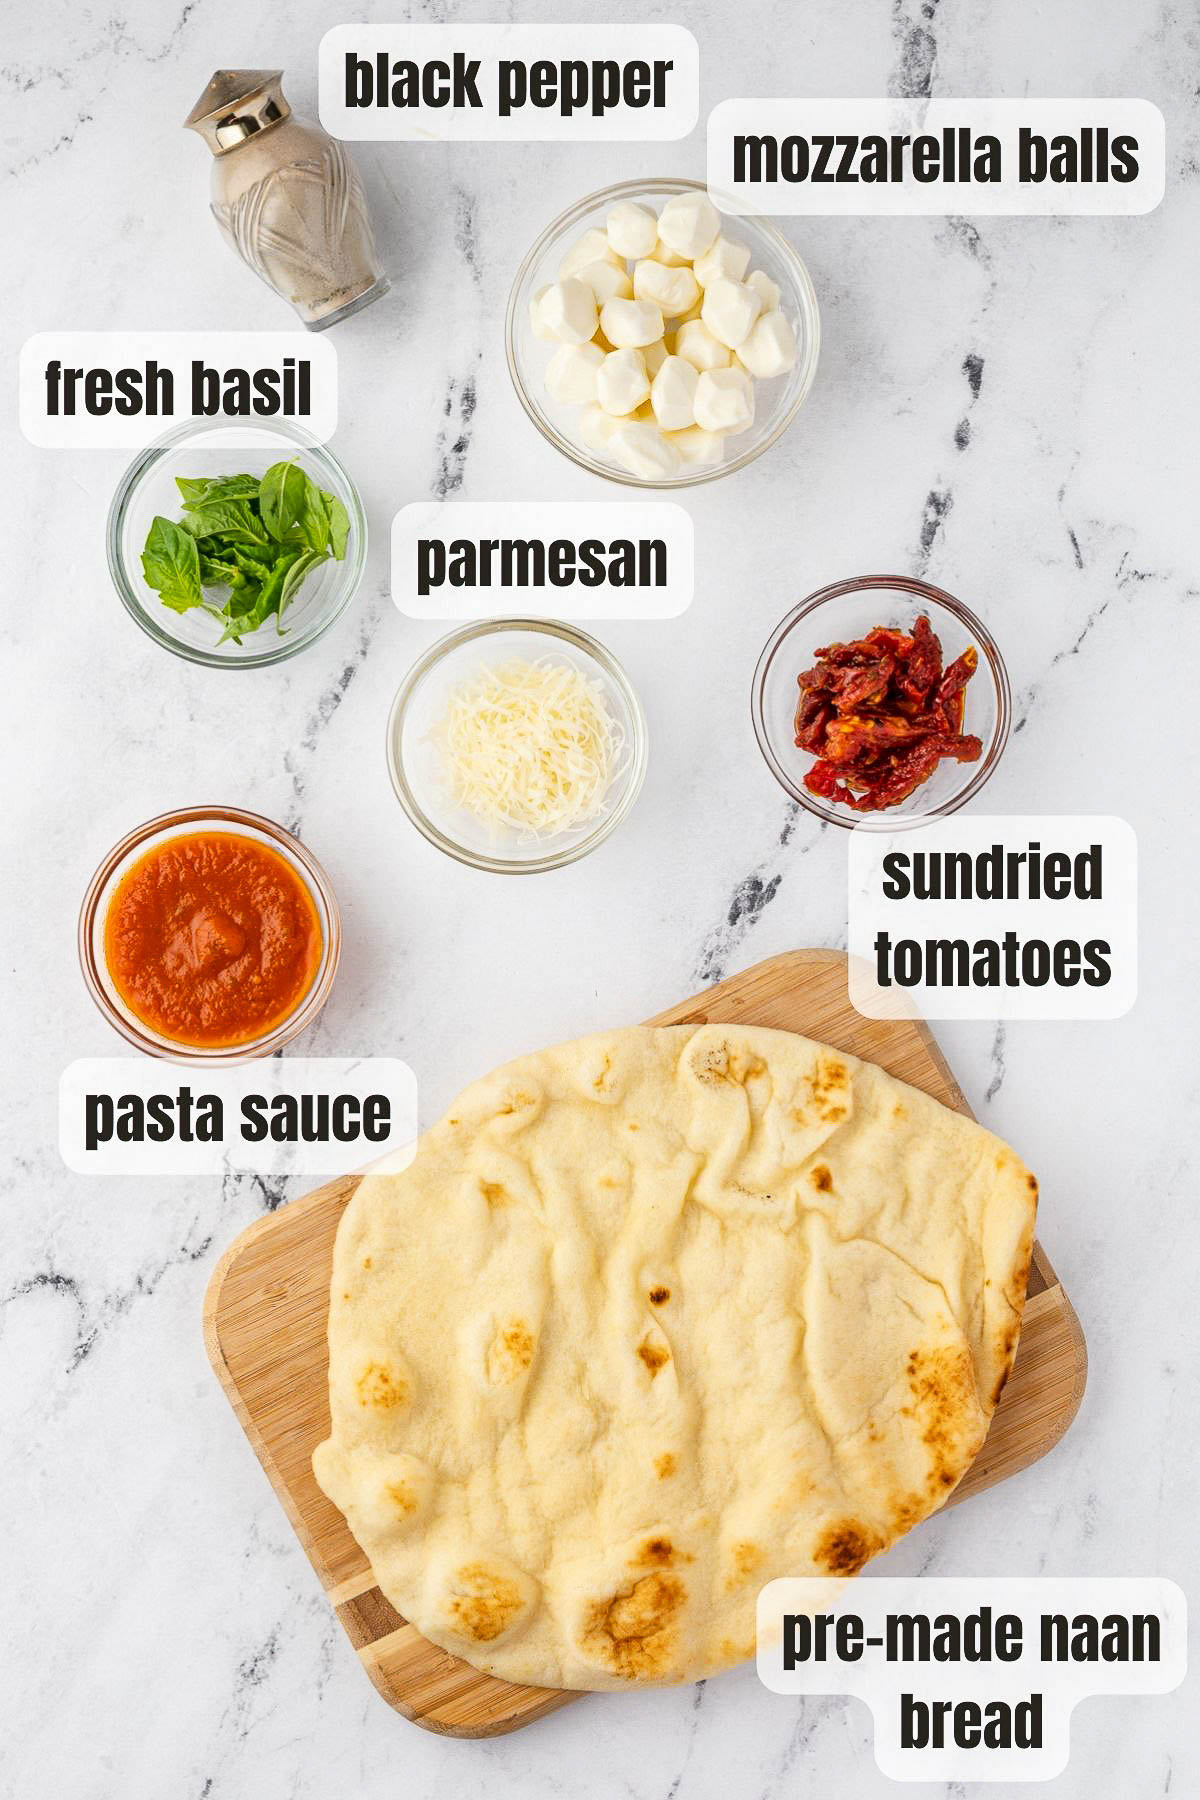 All the ingredients to make a naan pizza including pre-made naan bread, pasta sauce, sundried tomatoes, grated parmesan, fresh basil, small mozzarella balls and black pepper, all on a marble background.